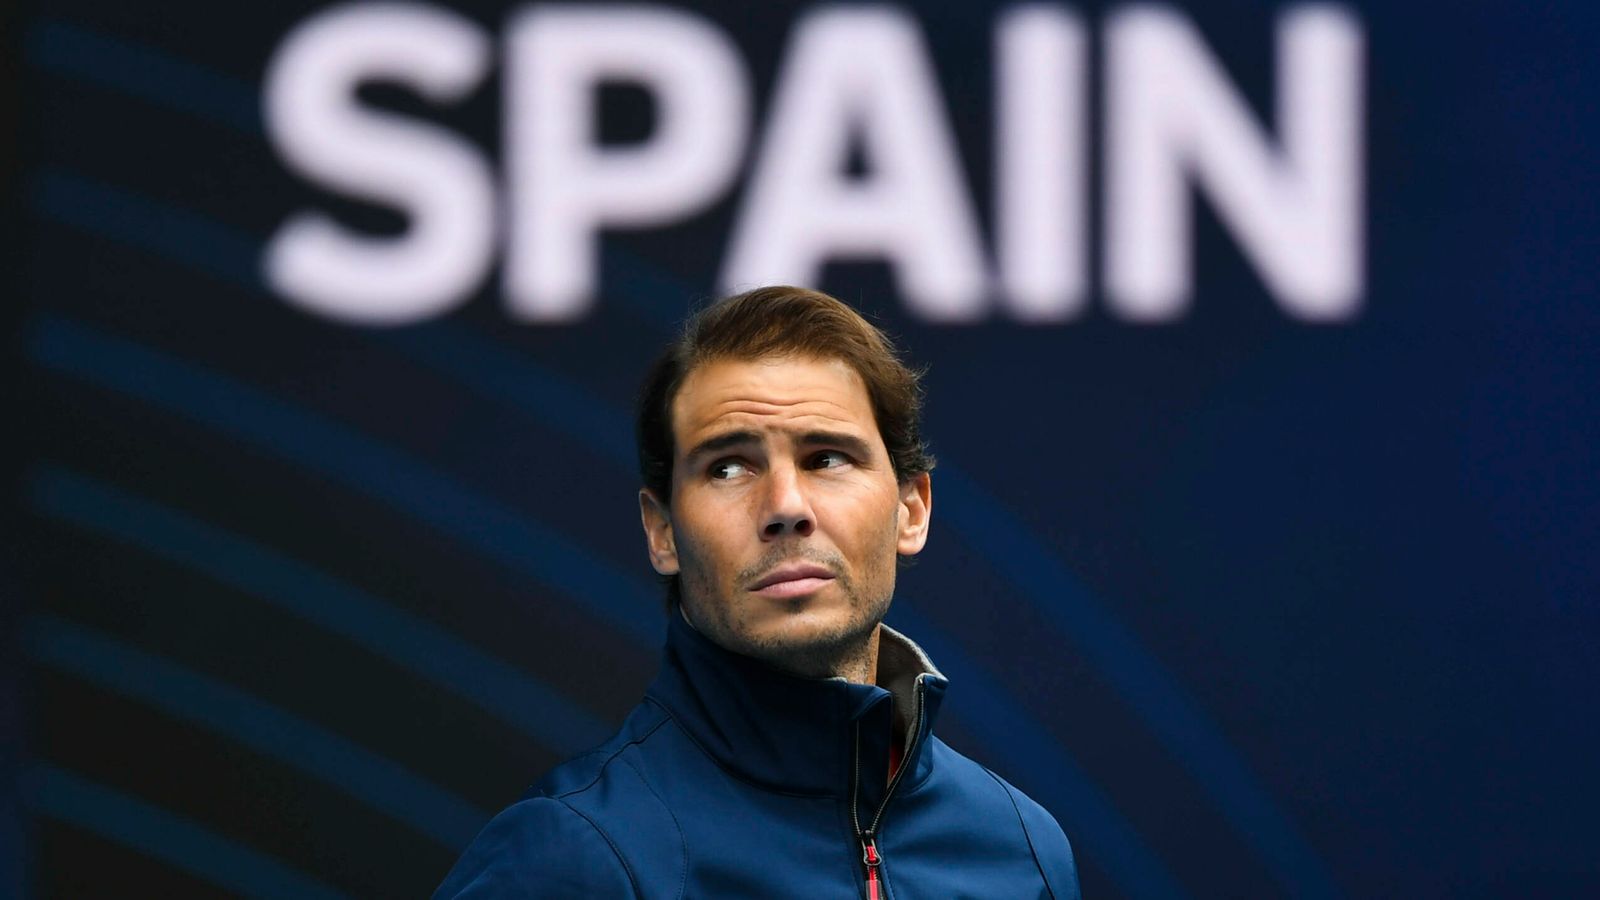 Tennis News: The ATP Cup: Rafael Nadal is also missing against Greece |  Tennis News